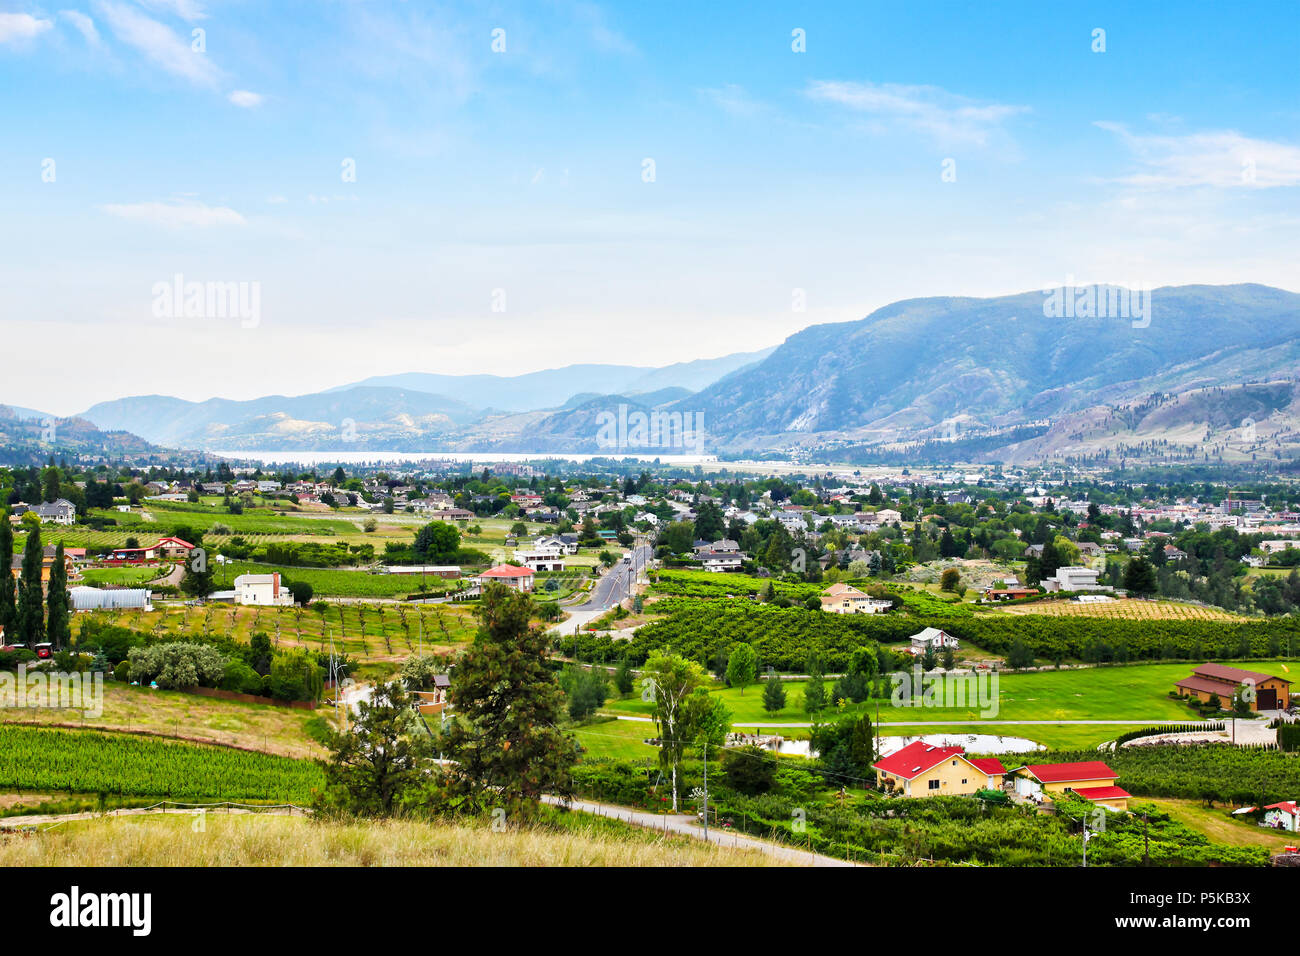 Aerial view of numerous Kelowna vineyards surrounding Lake Okanagan with mountains in the background. Kelowna is renowned for its wineries and winemak Stock Photo